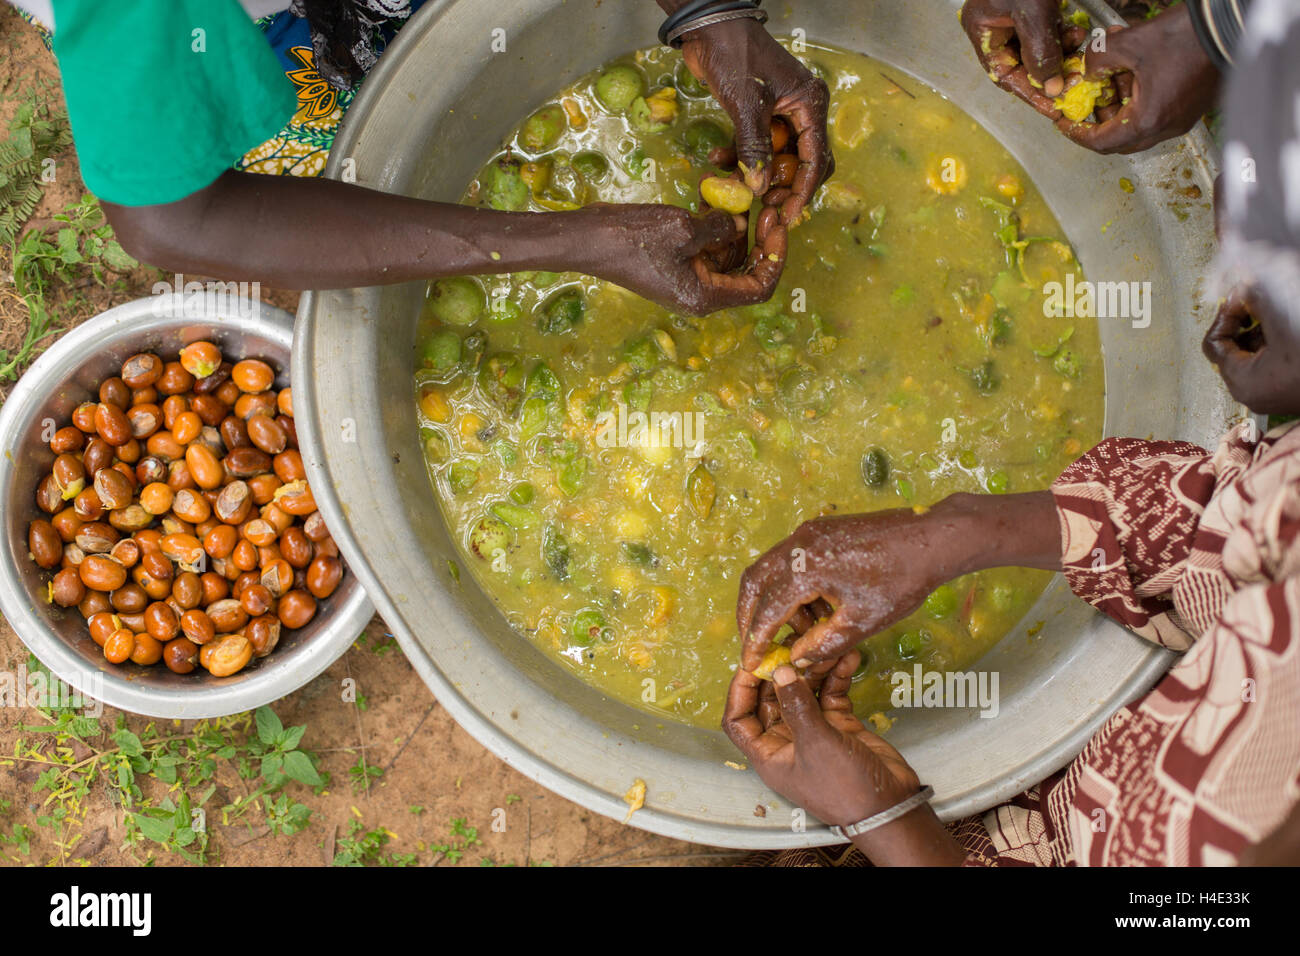 Women extract the shea nut from shea fruit in Burkina Faso, Africa. The nut is used for making shea butter and oil. Stock Photo